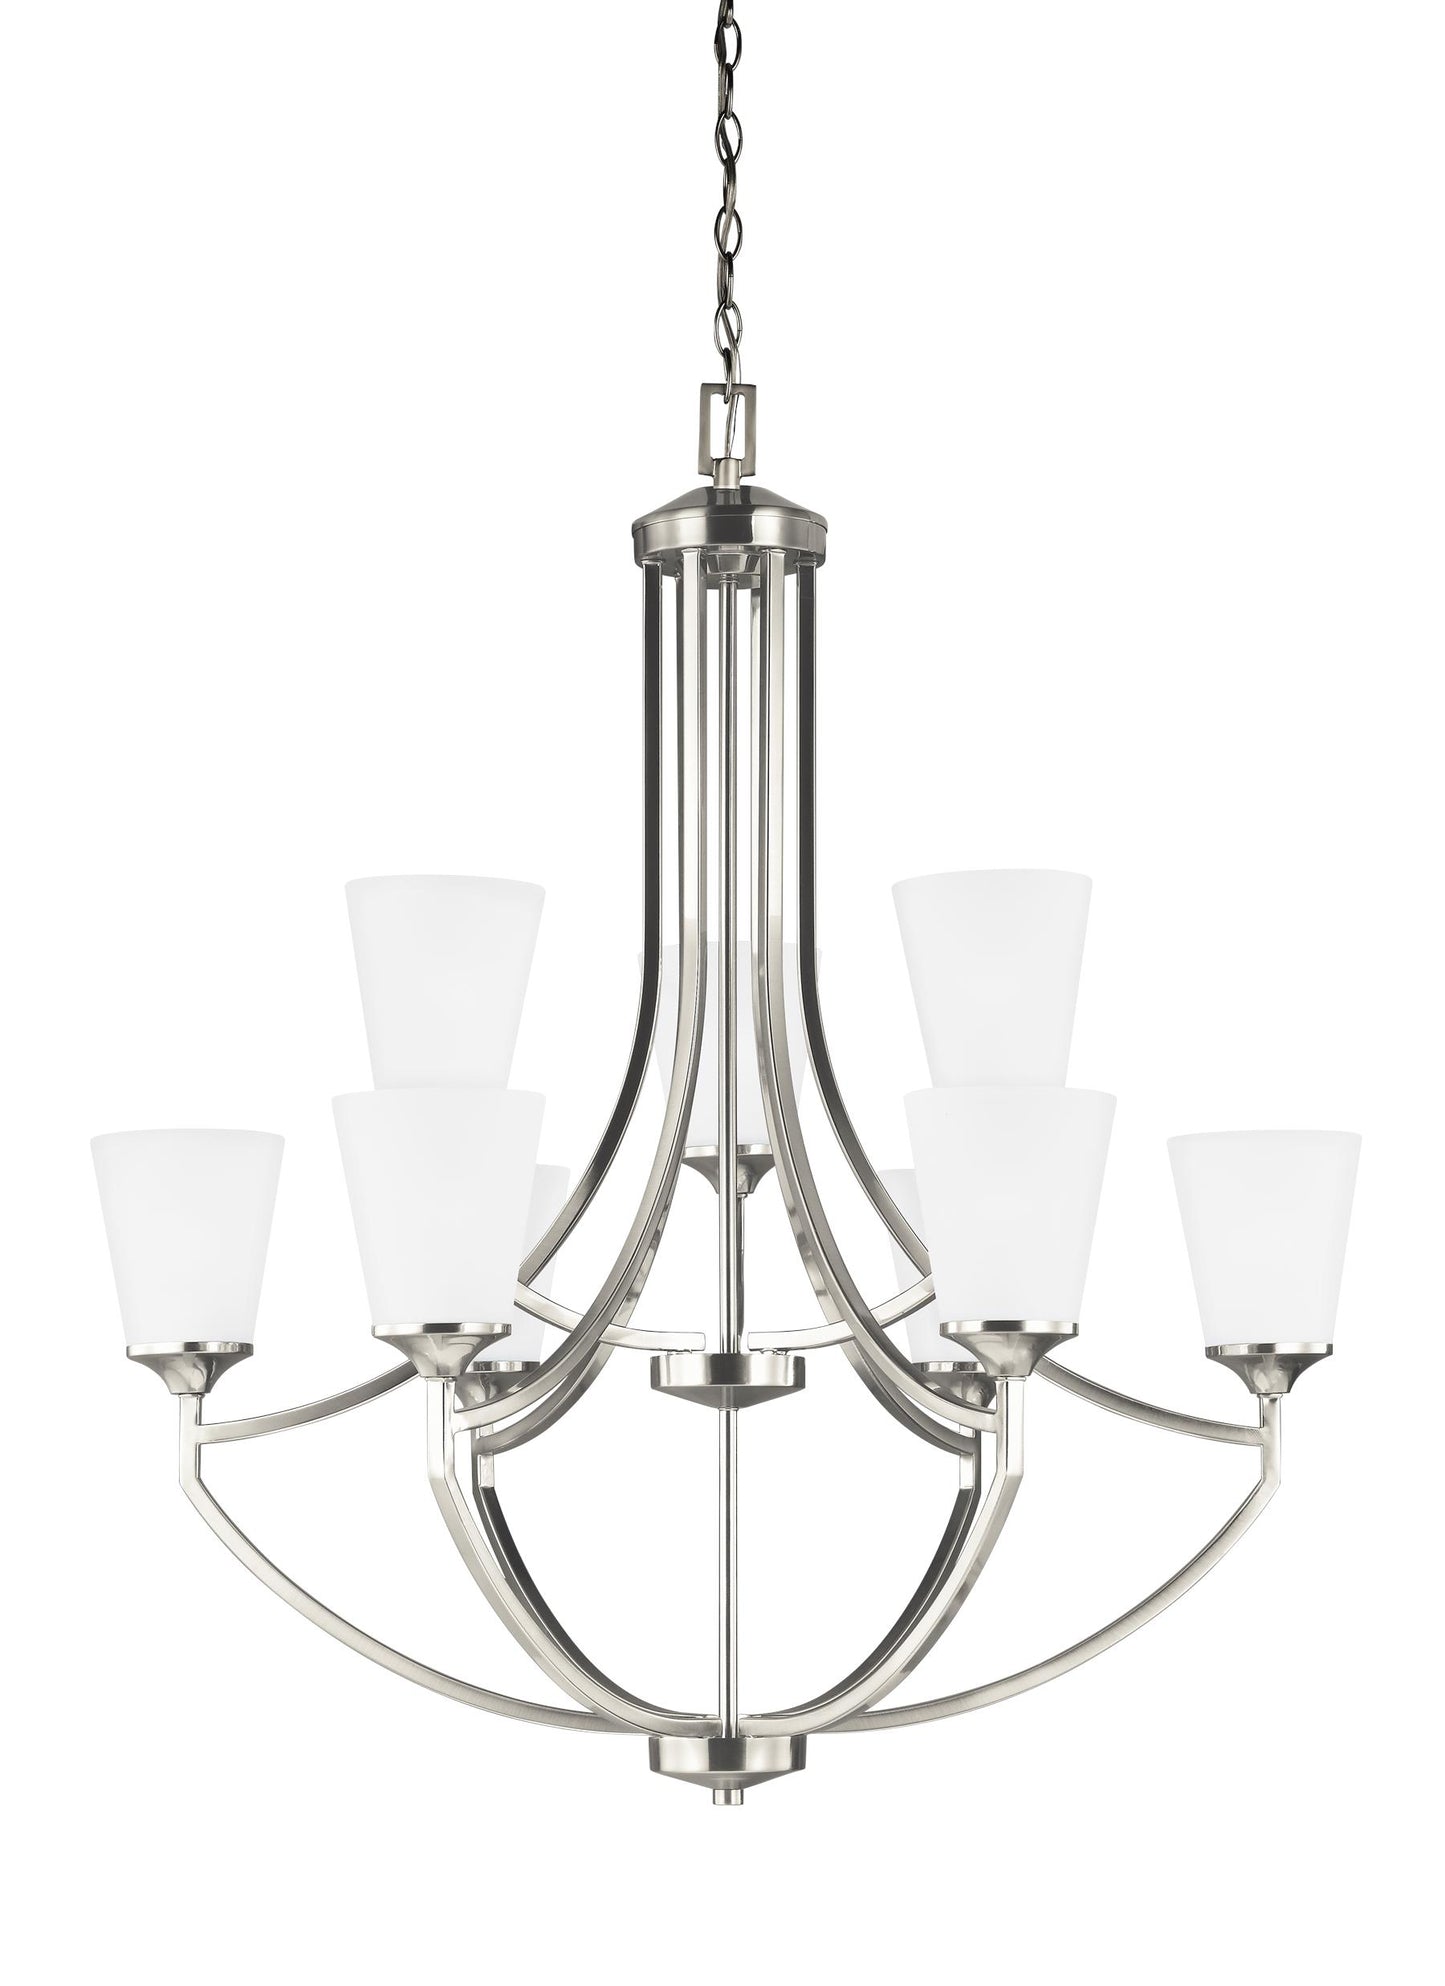 Hanford traditional 9-light indoor dimmable ceiling chandelier pendant light in brushed nickel silver finish with satin et...